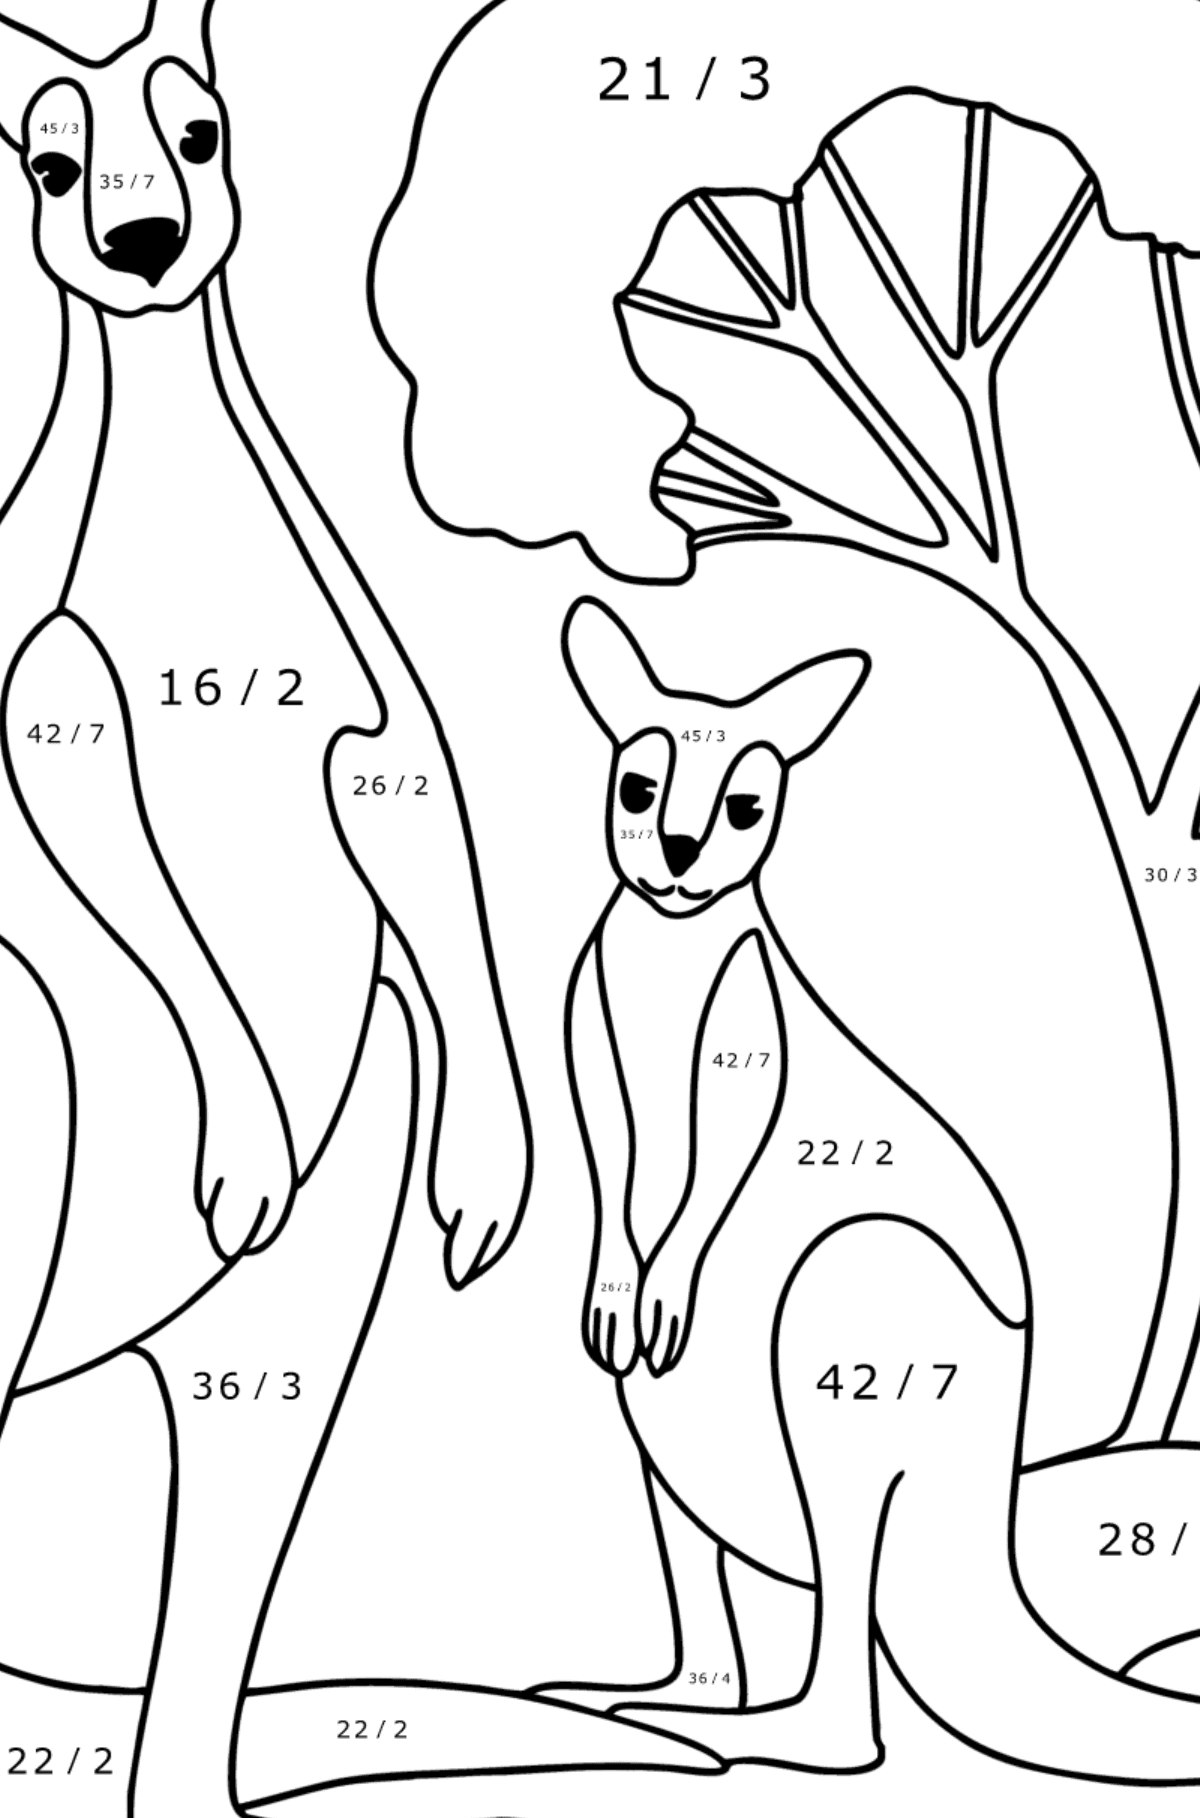 Kangaroo with Baby Coloring Page - Math Coloring - Division for Kids